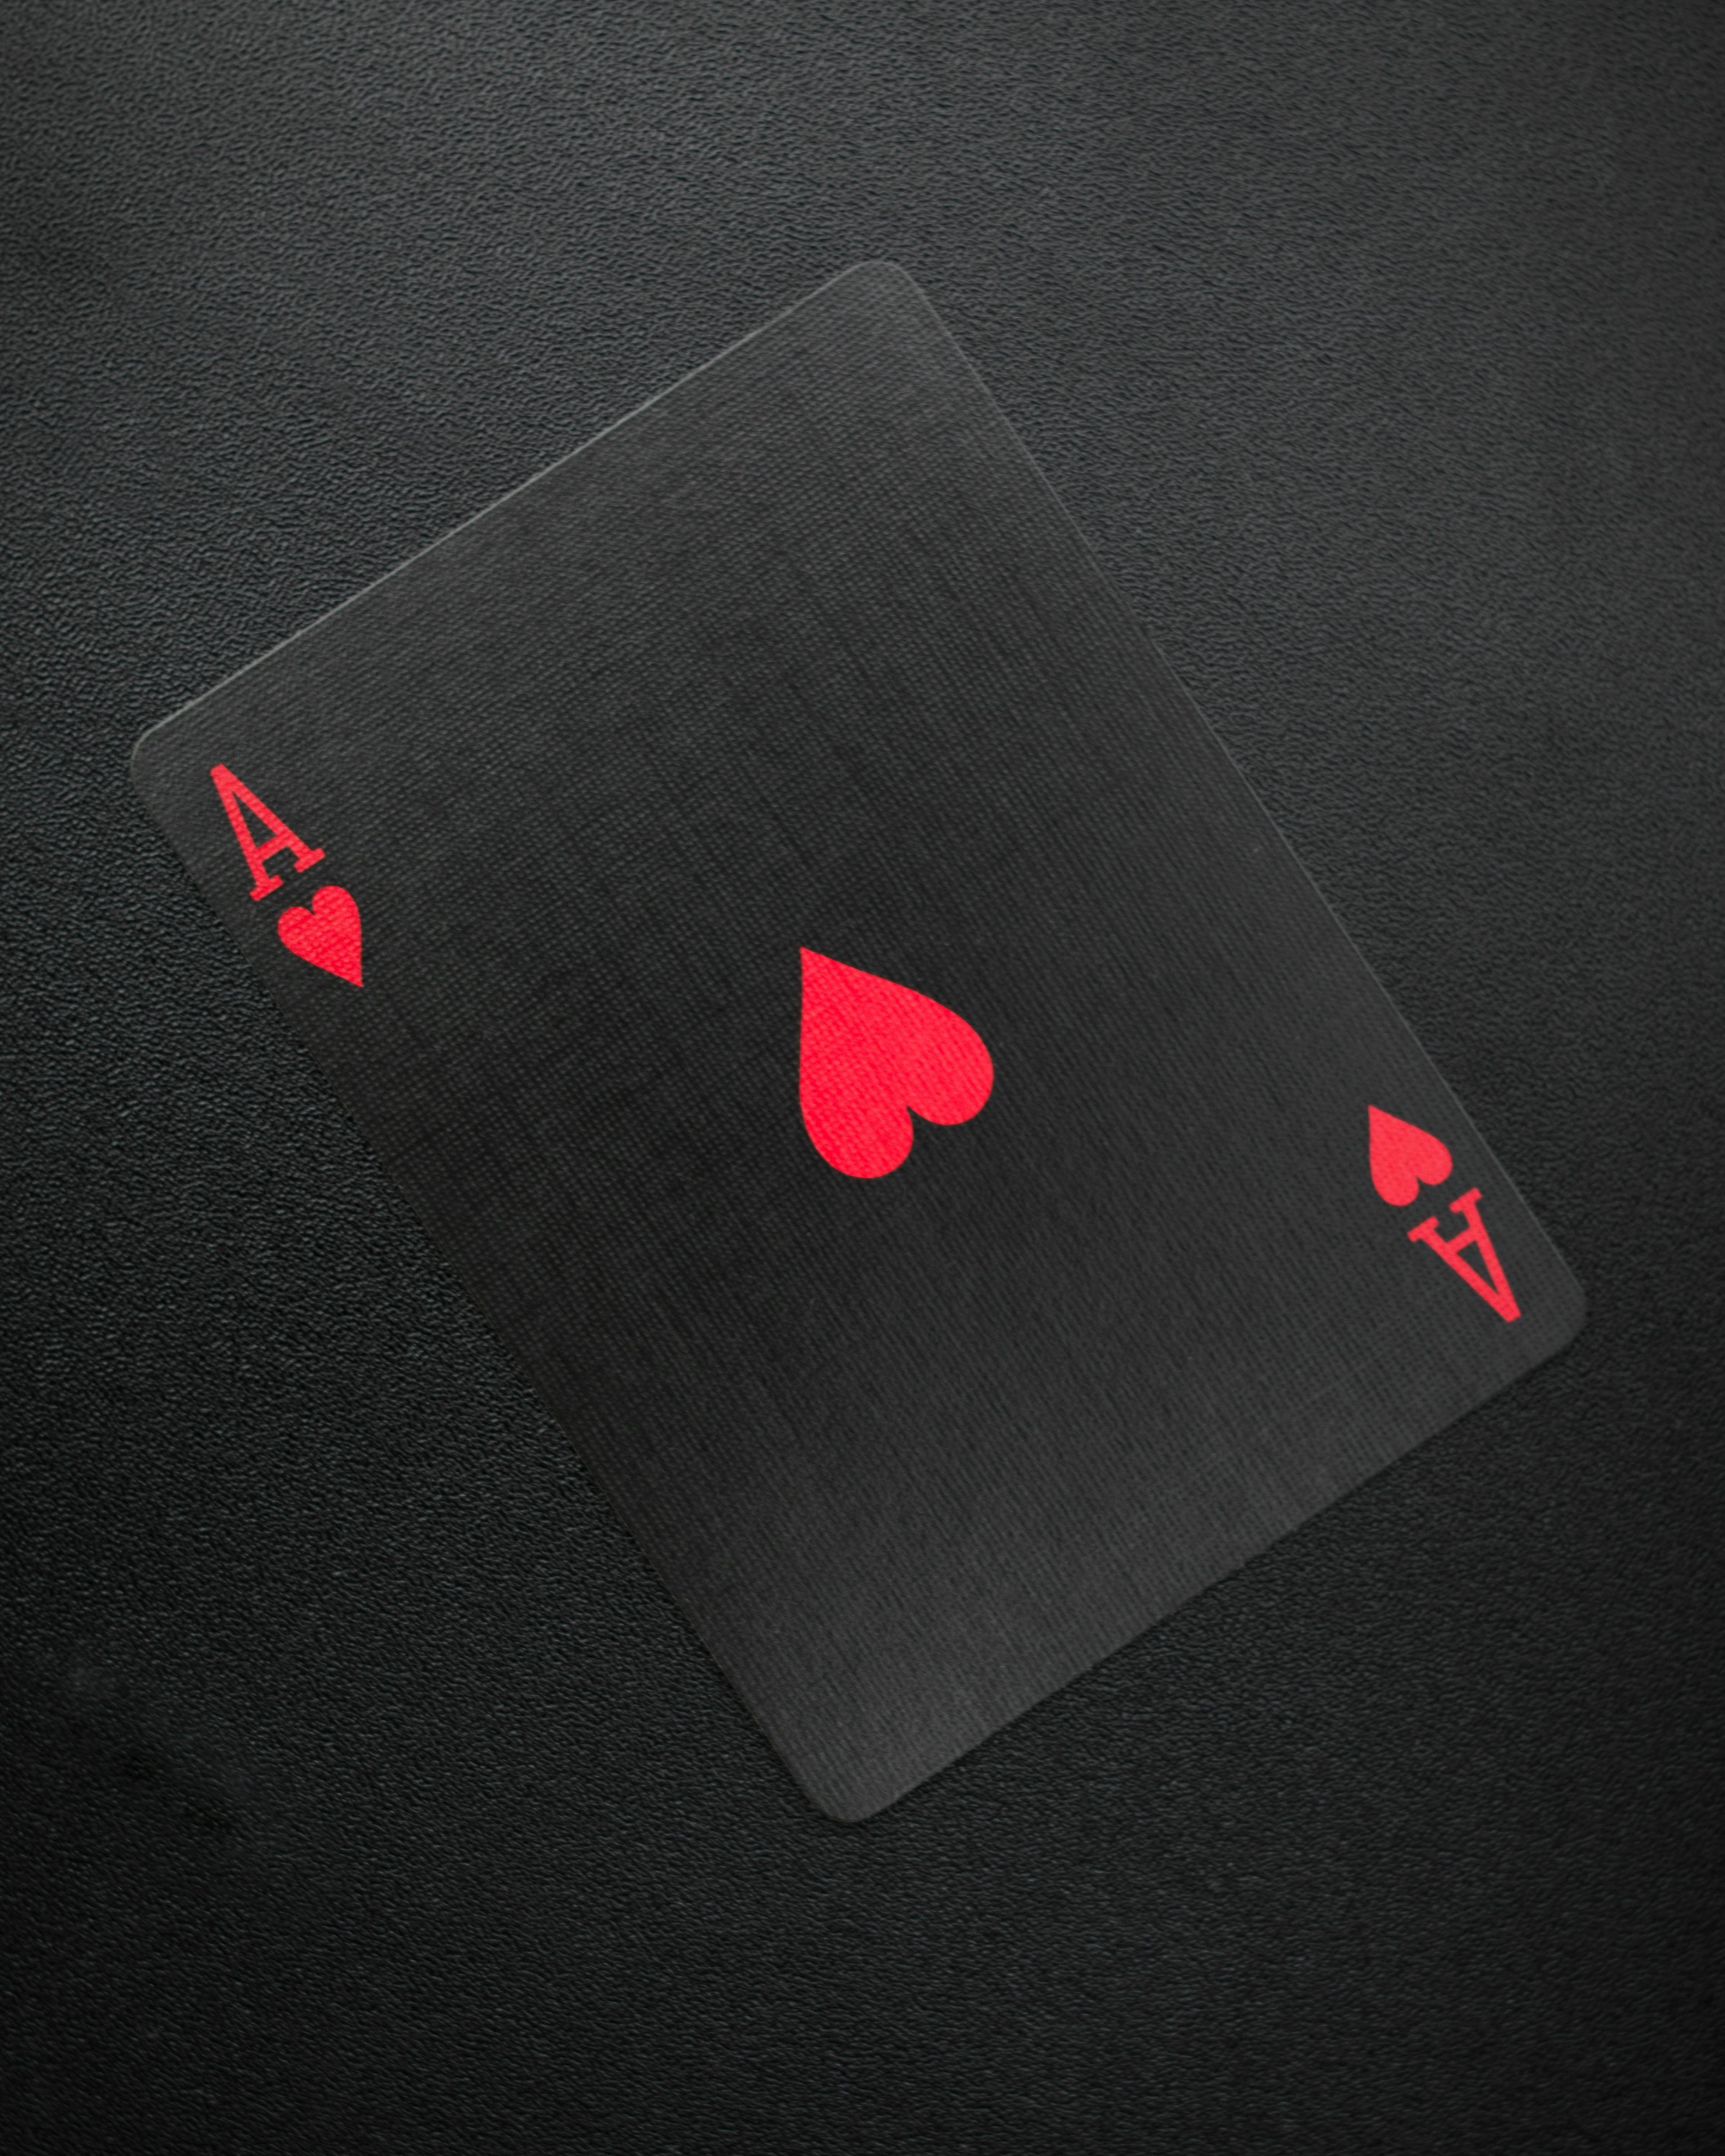 Playing Cards Wallpaper 1920x1080 71 images